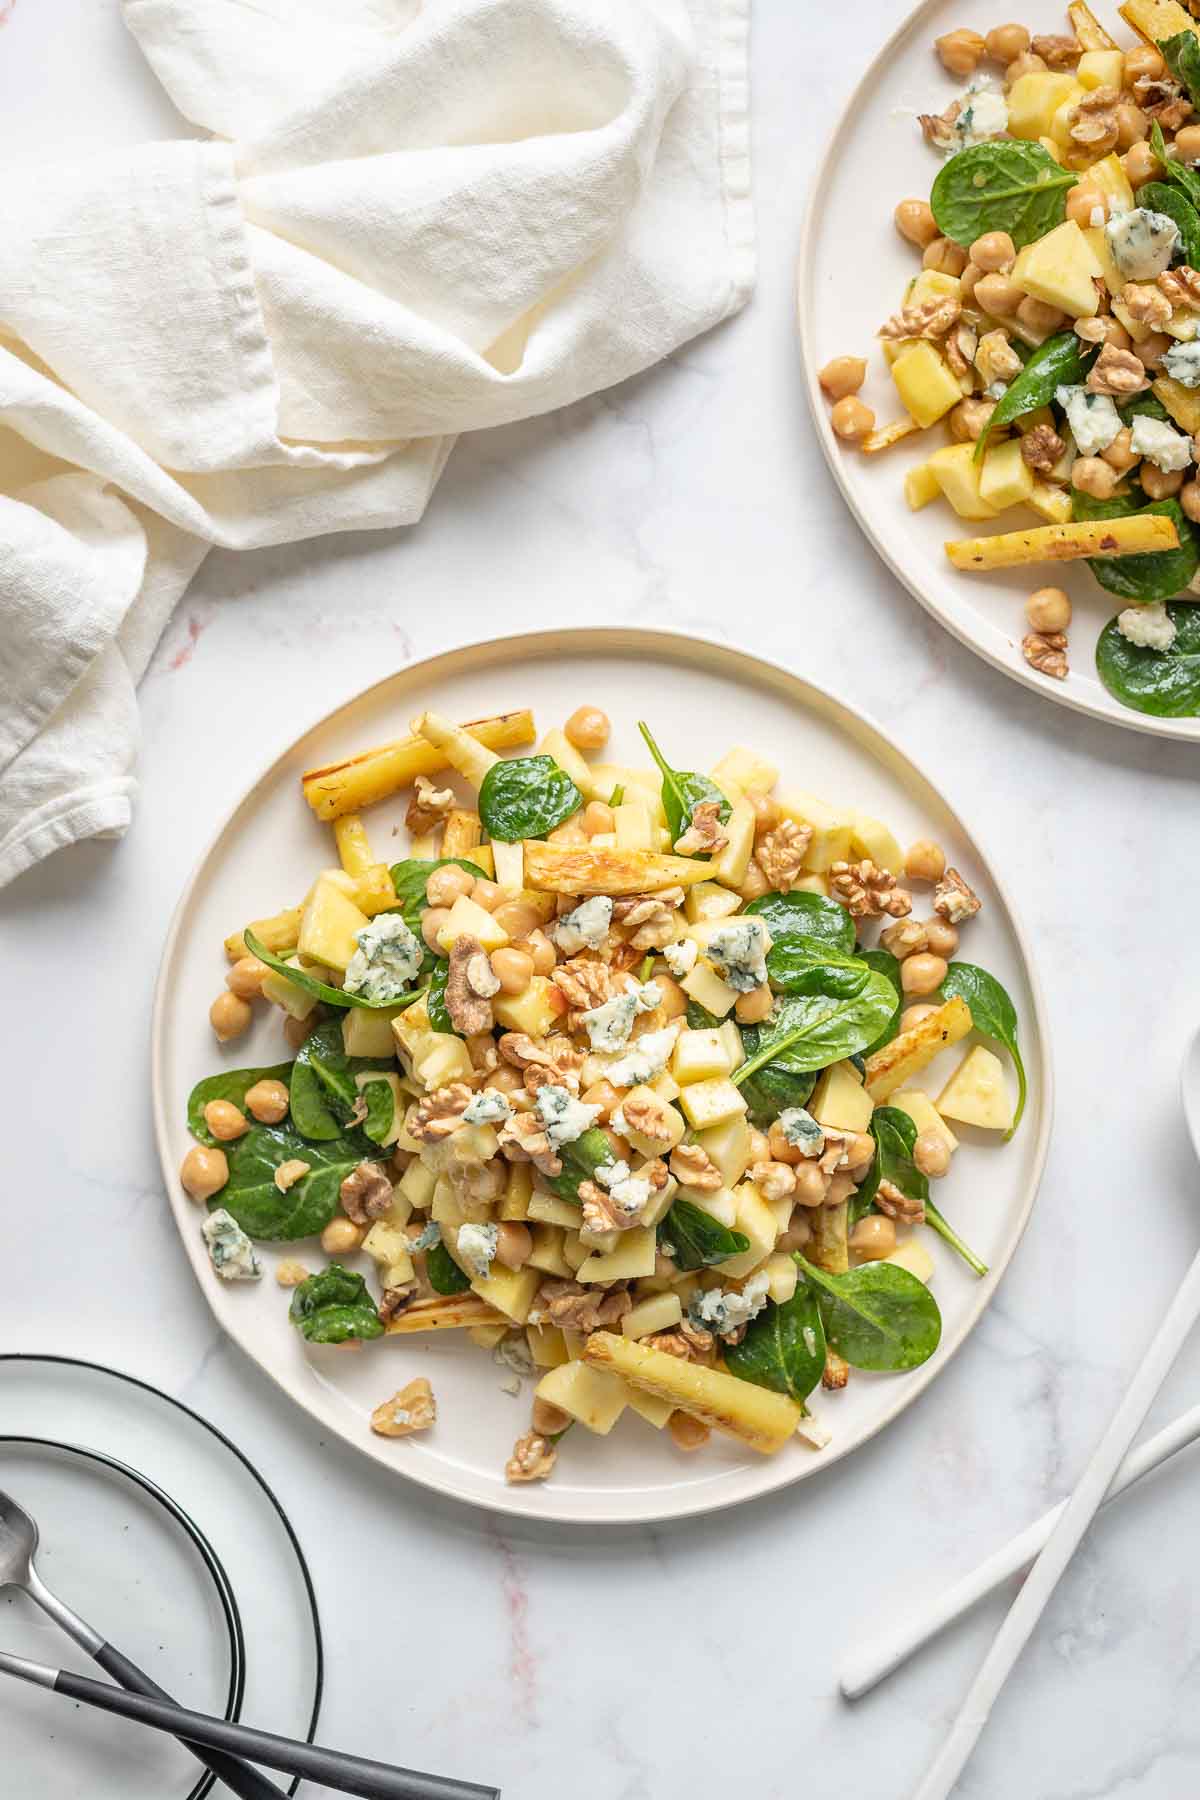 Parsnip Salad with Chickpeas, Apple, Walnuts & Blue Cheese